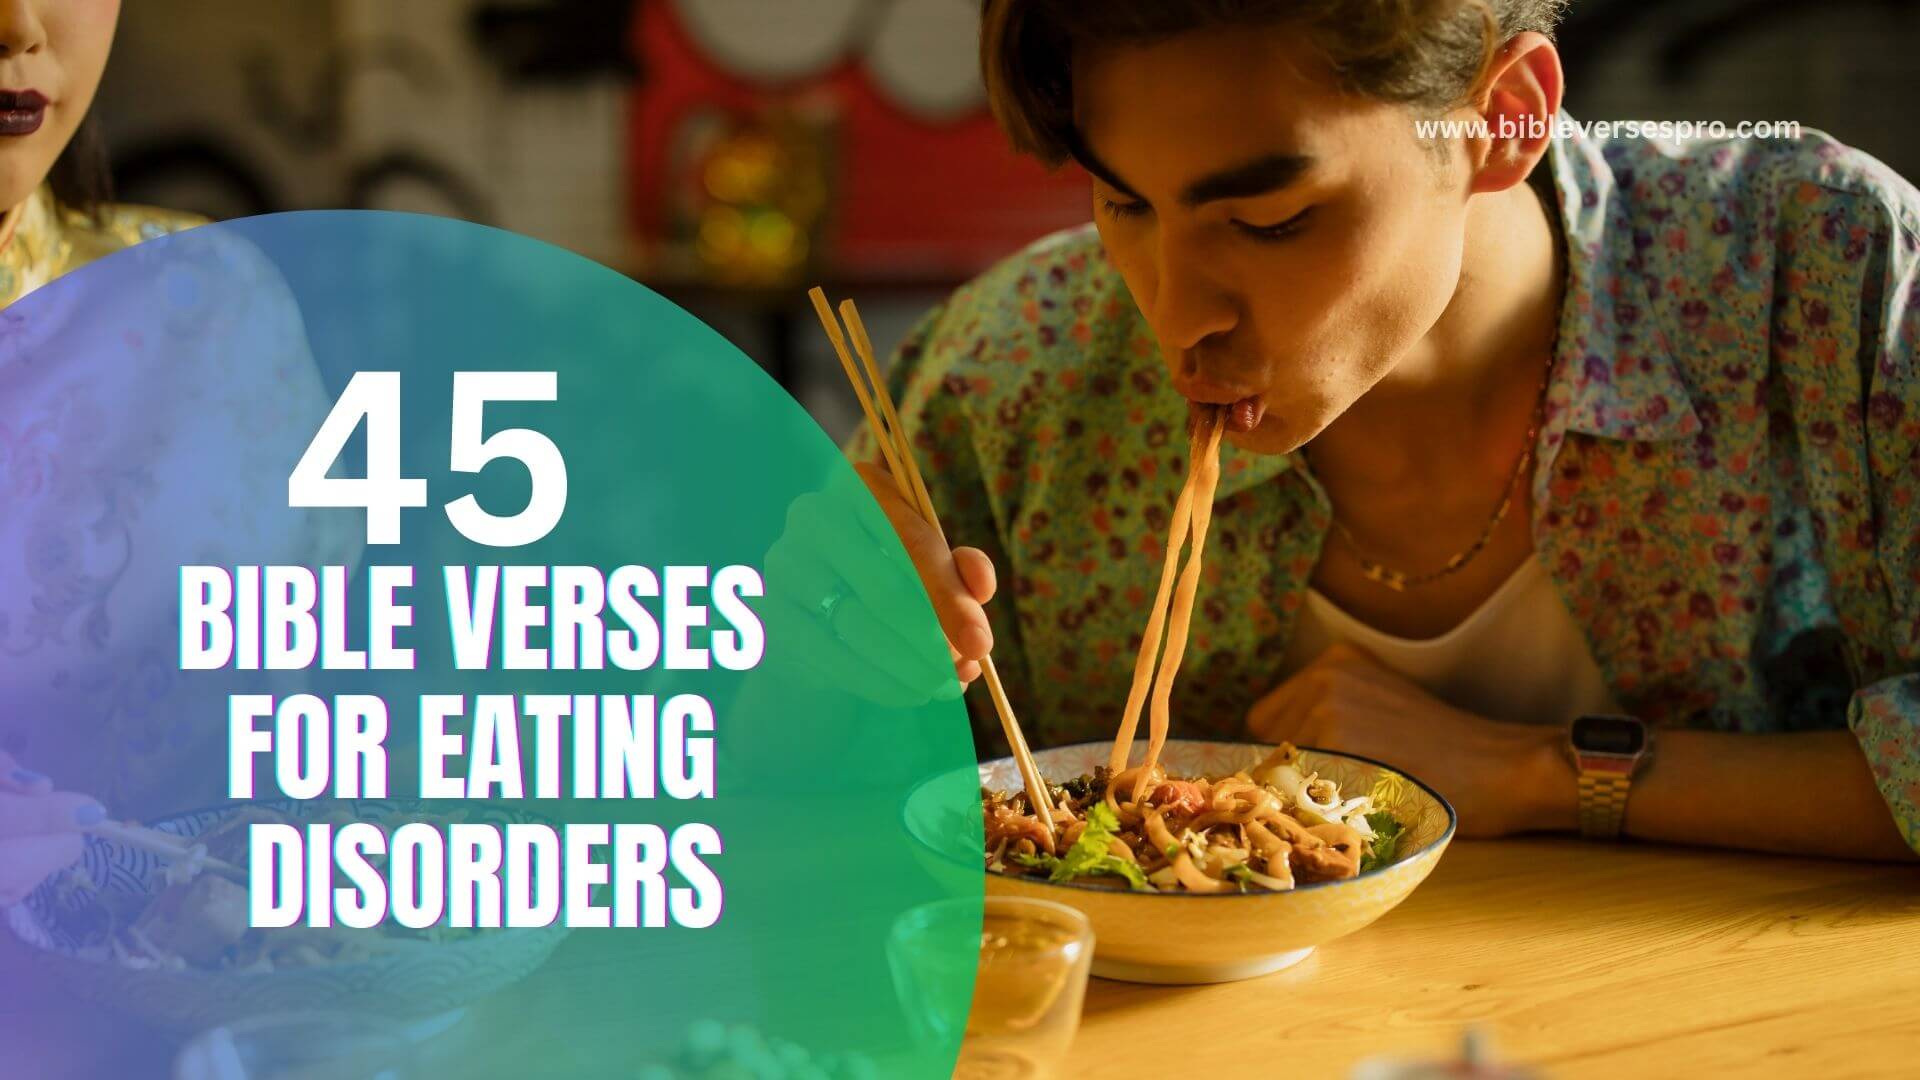 BIBLE VERSES FOR EATING DISORDERS (1)